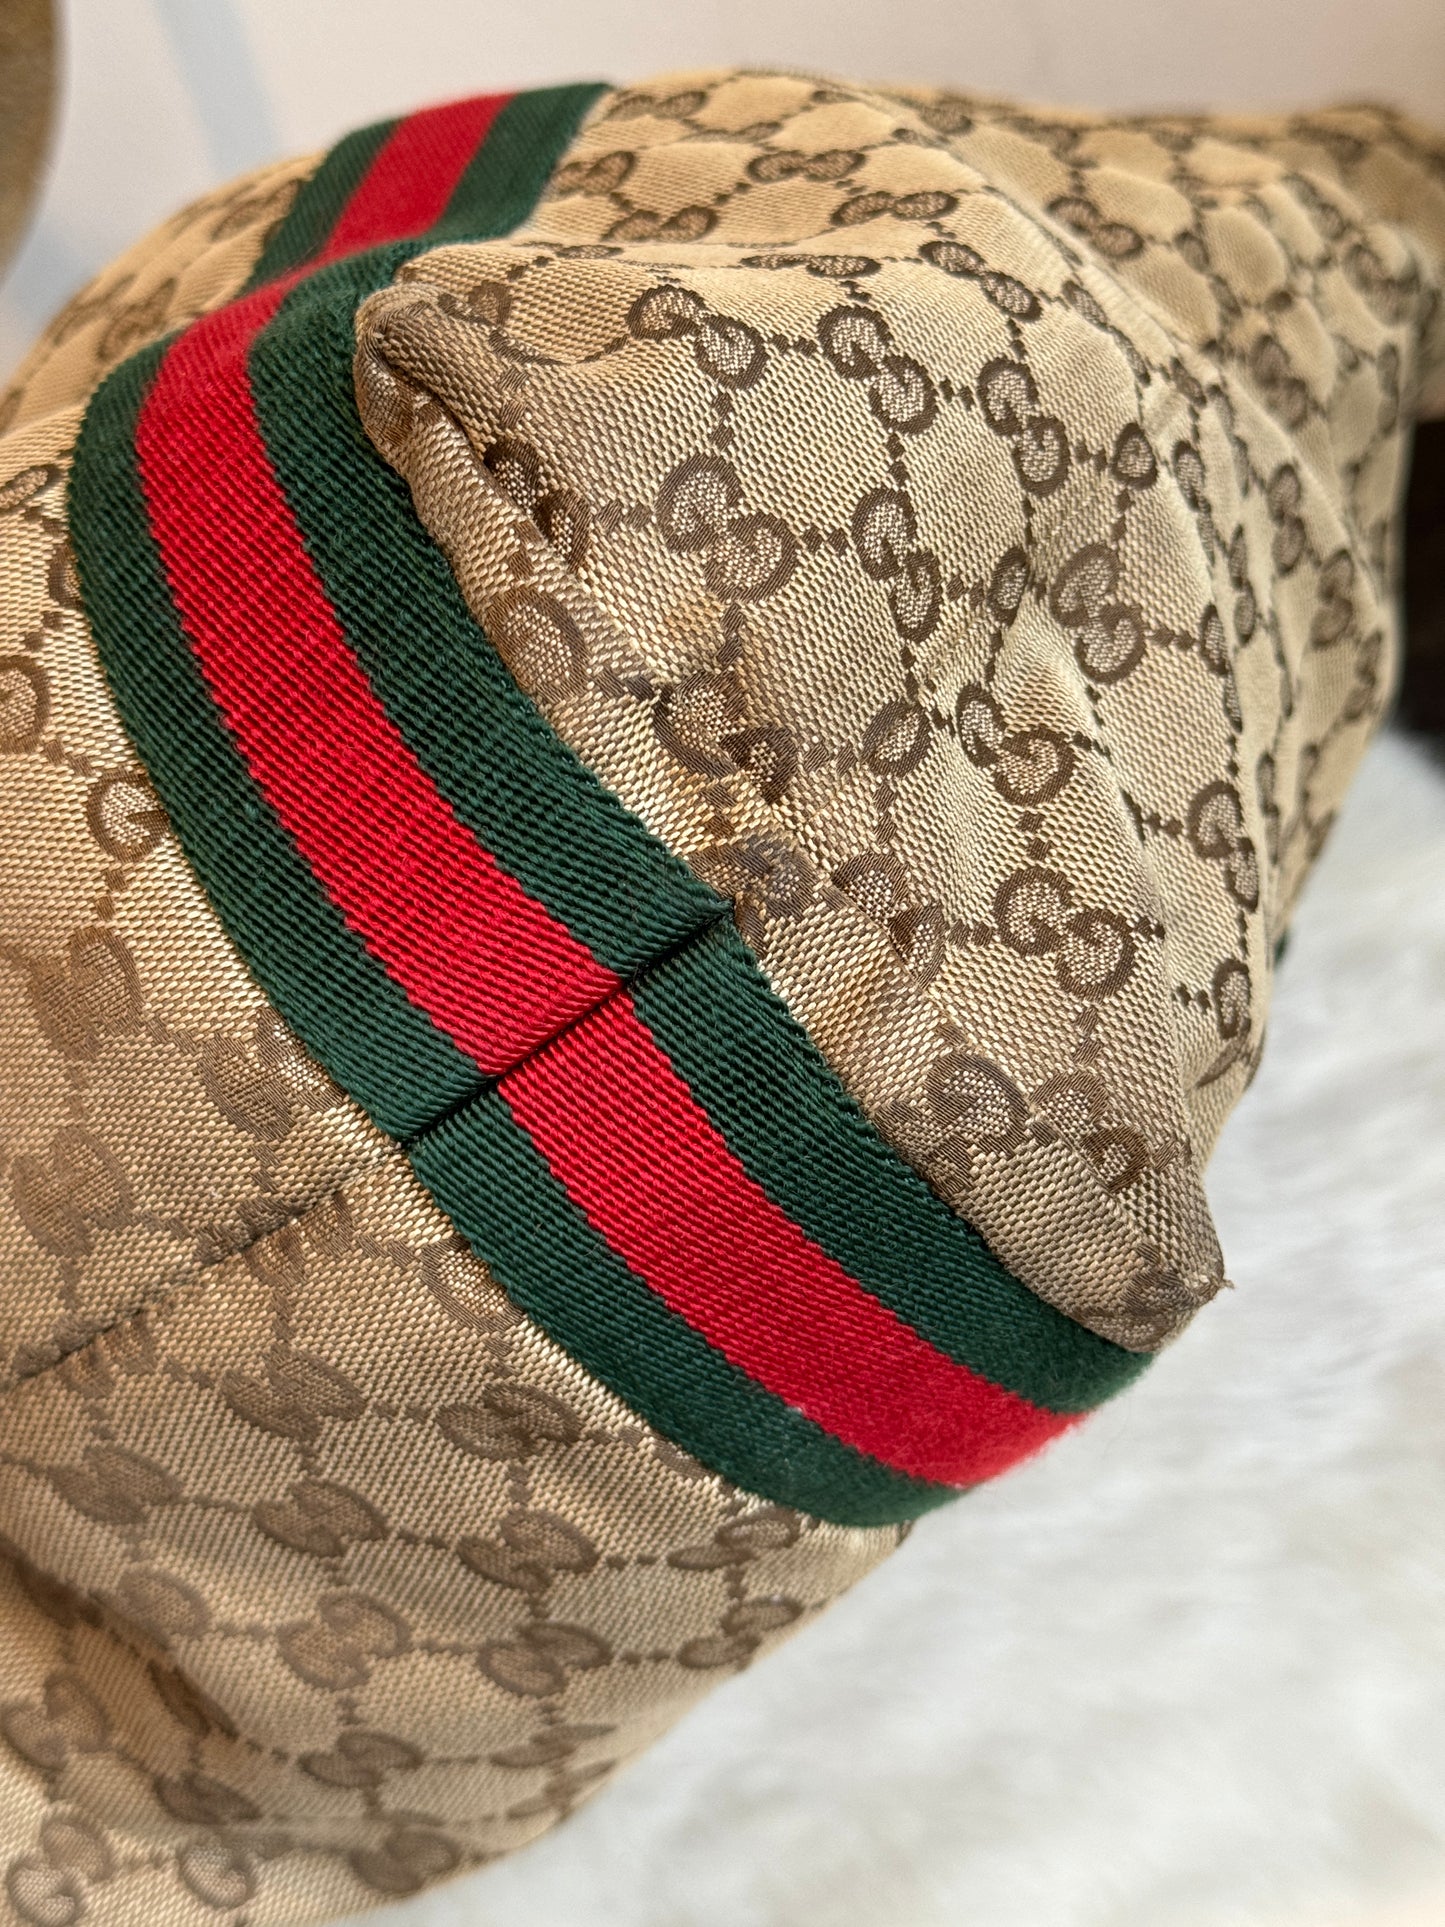 GUCCI Lt Brown Canvas Sherry Line Web Tote